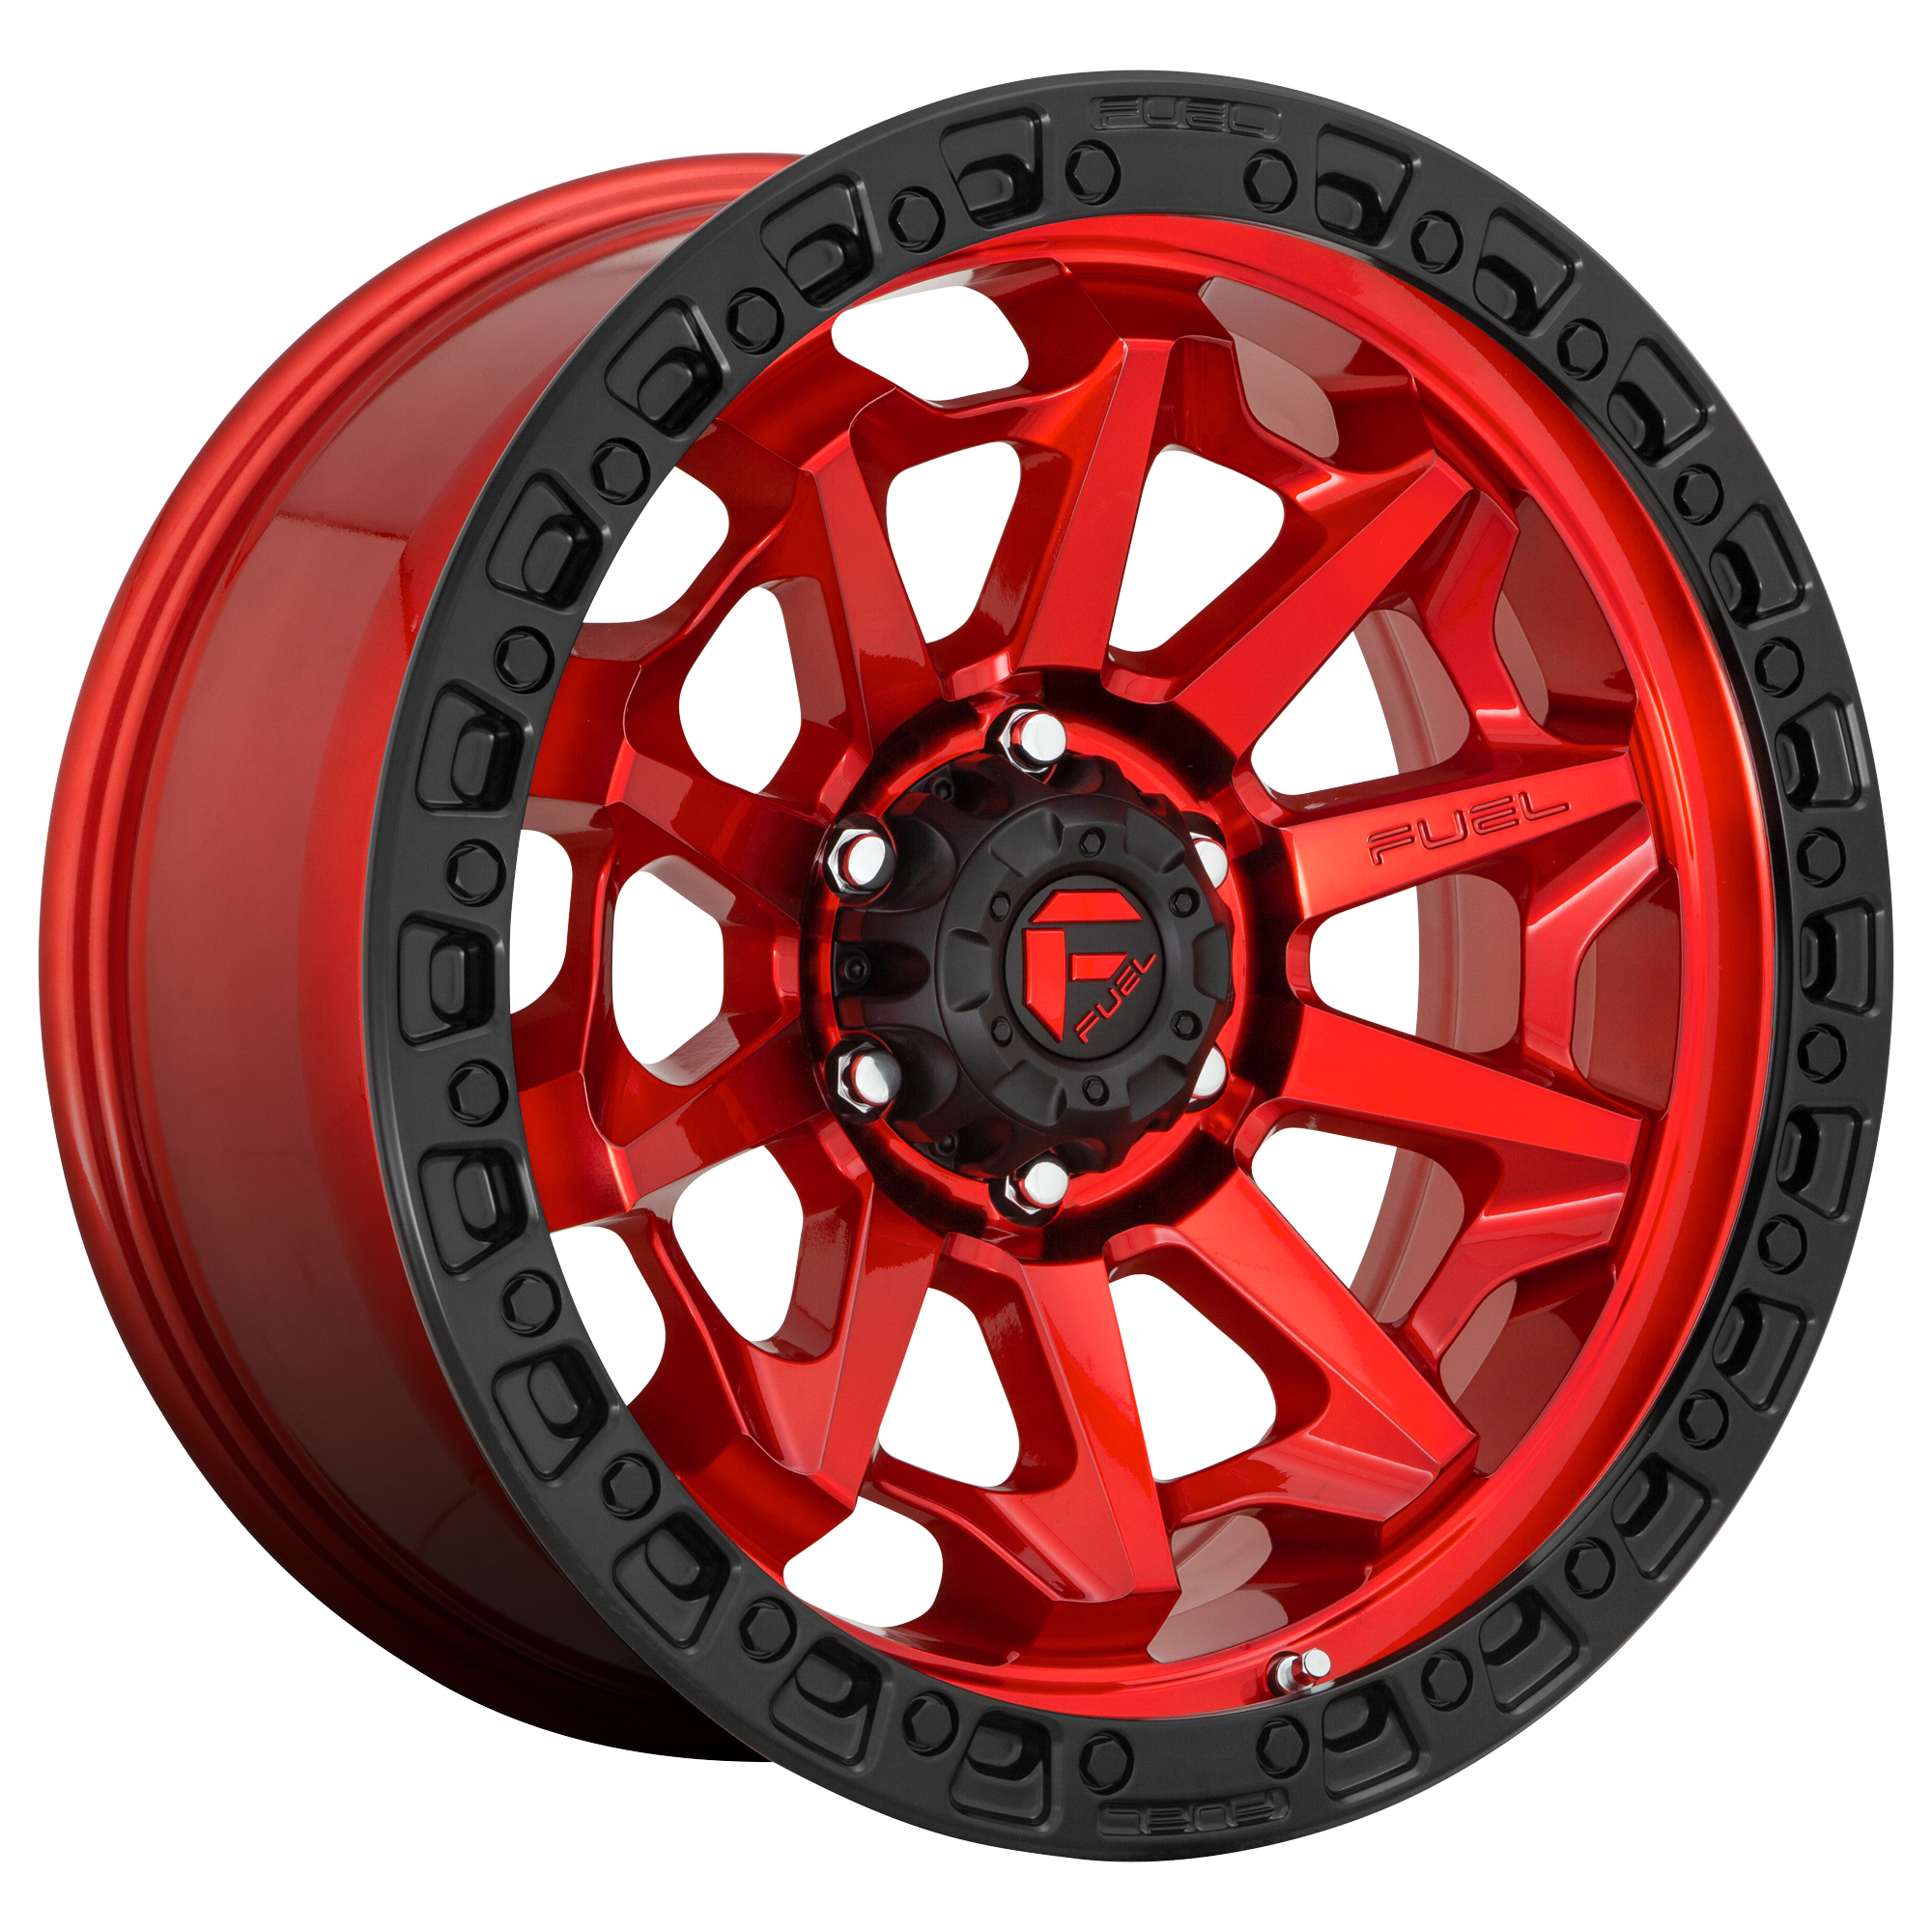 COVERT 17x9 8x170.00 CANDY RED BLACK BEAD RING (1 mm) - Tires and Engine Performance